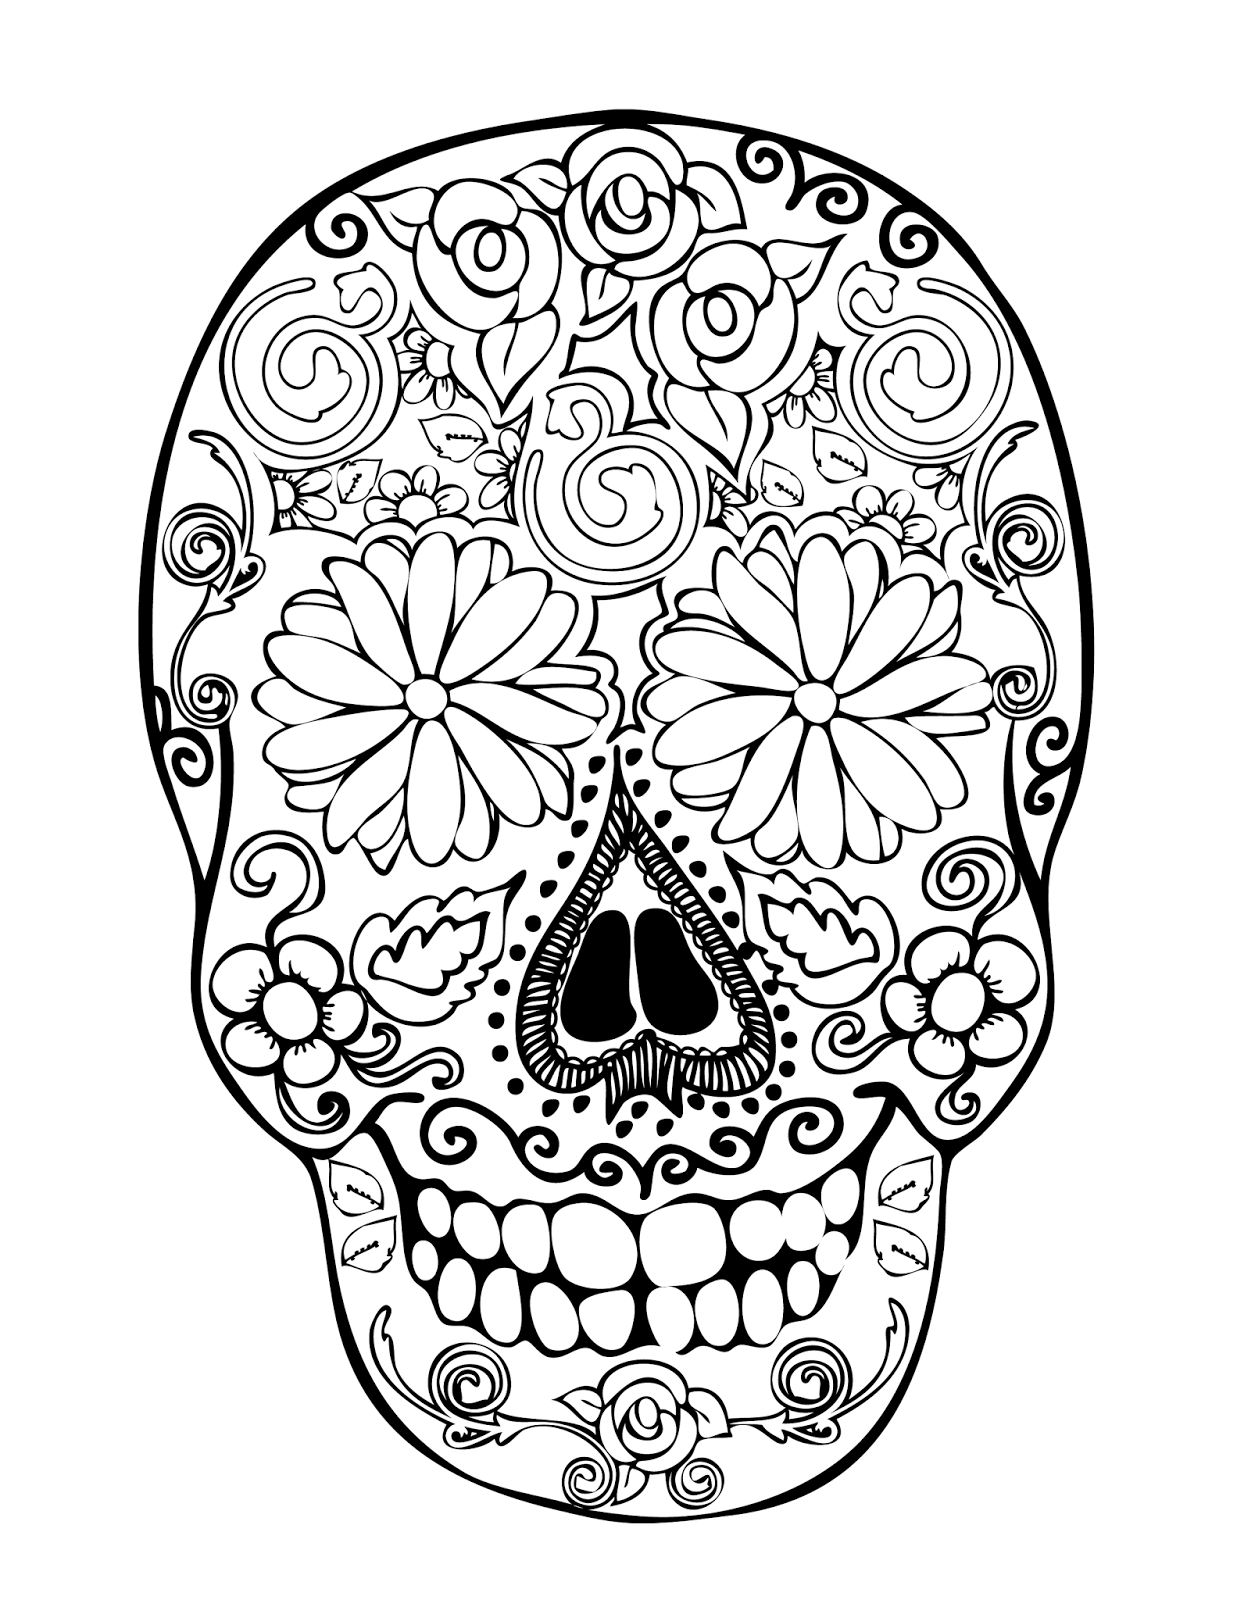 Free Coloring Pages Of Skulls Effy Moom Free Coloring Picture wallpaper give a chance to color on the wall without getting in trouble! Fill the walls of your home or office with stress-relieving [effymoom.blogspot.com]